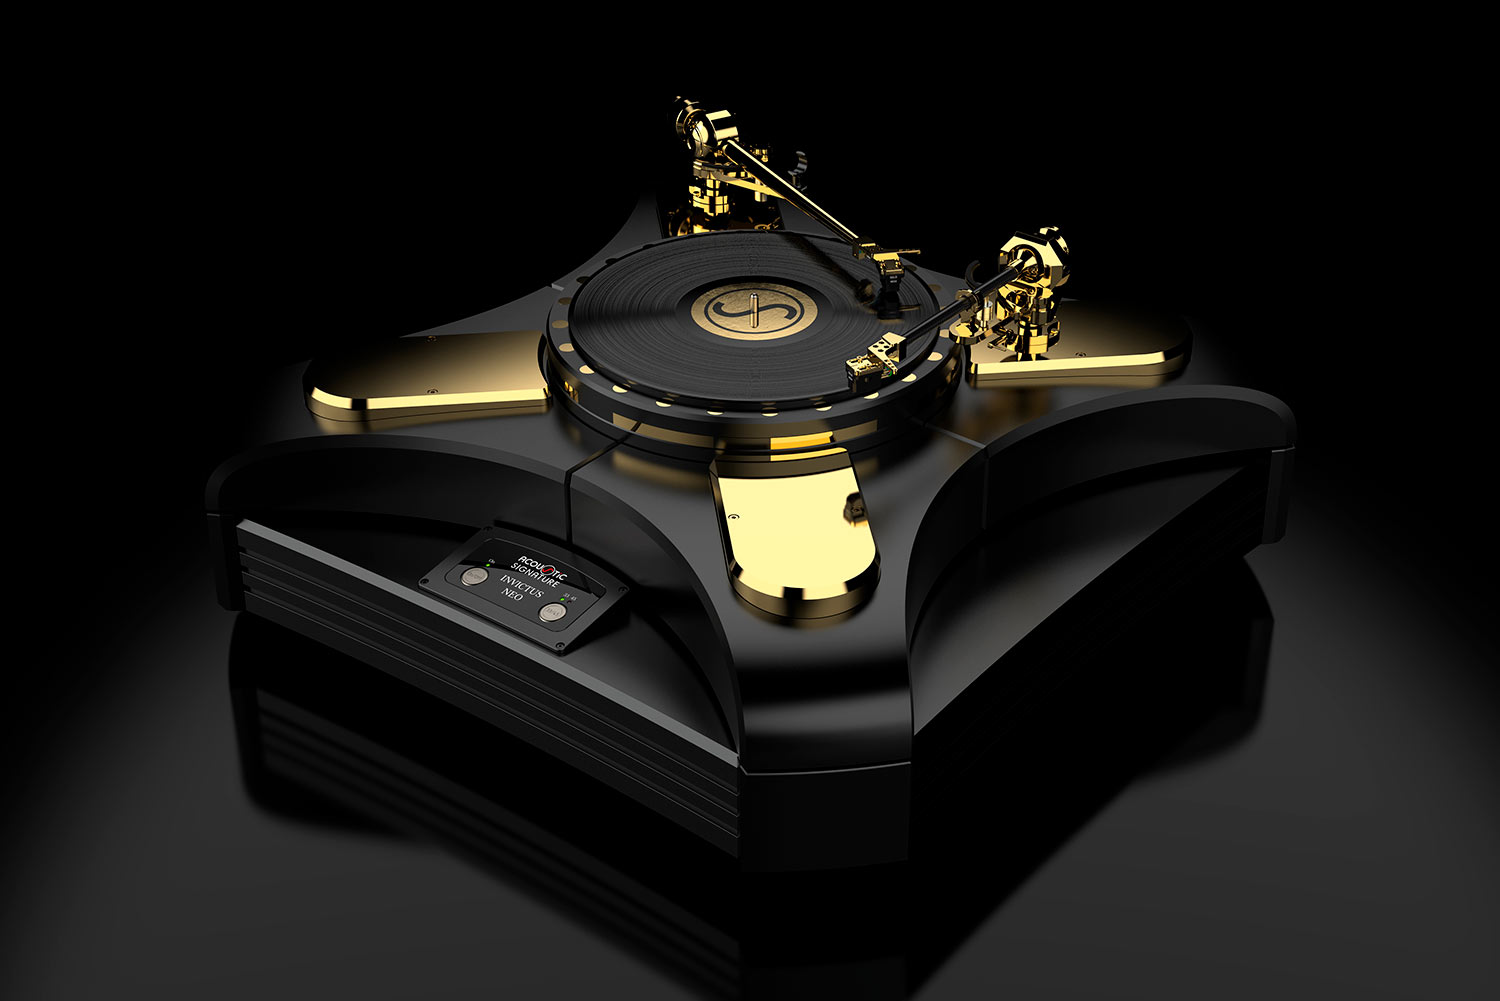 Invictus NEO playing a record at the highest audiophile level